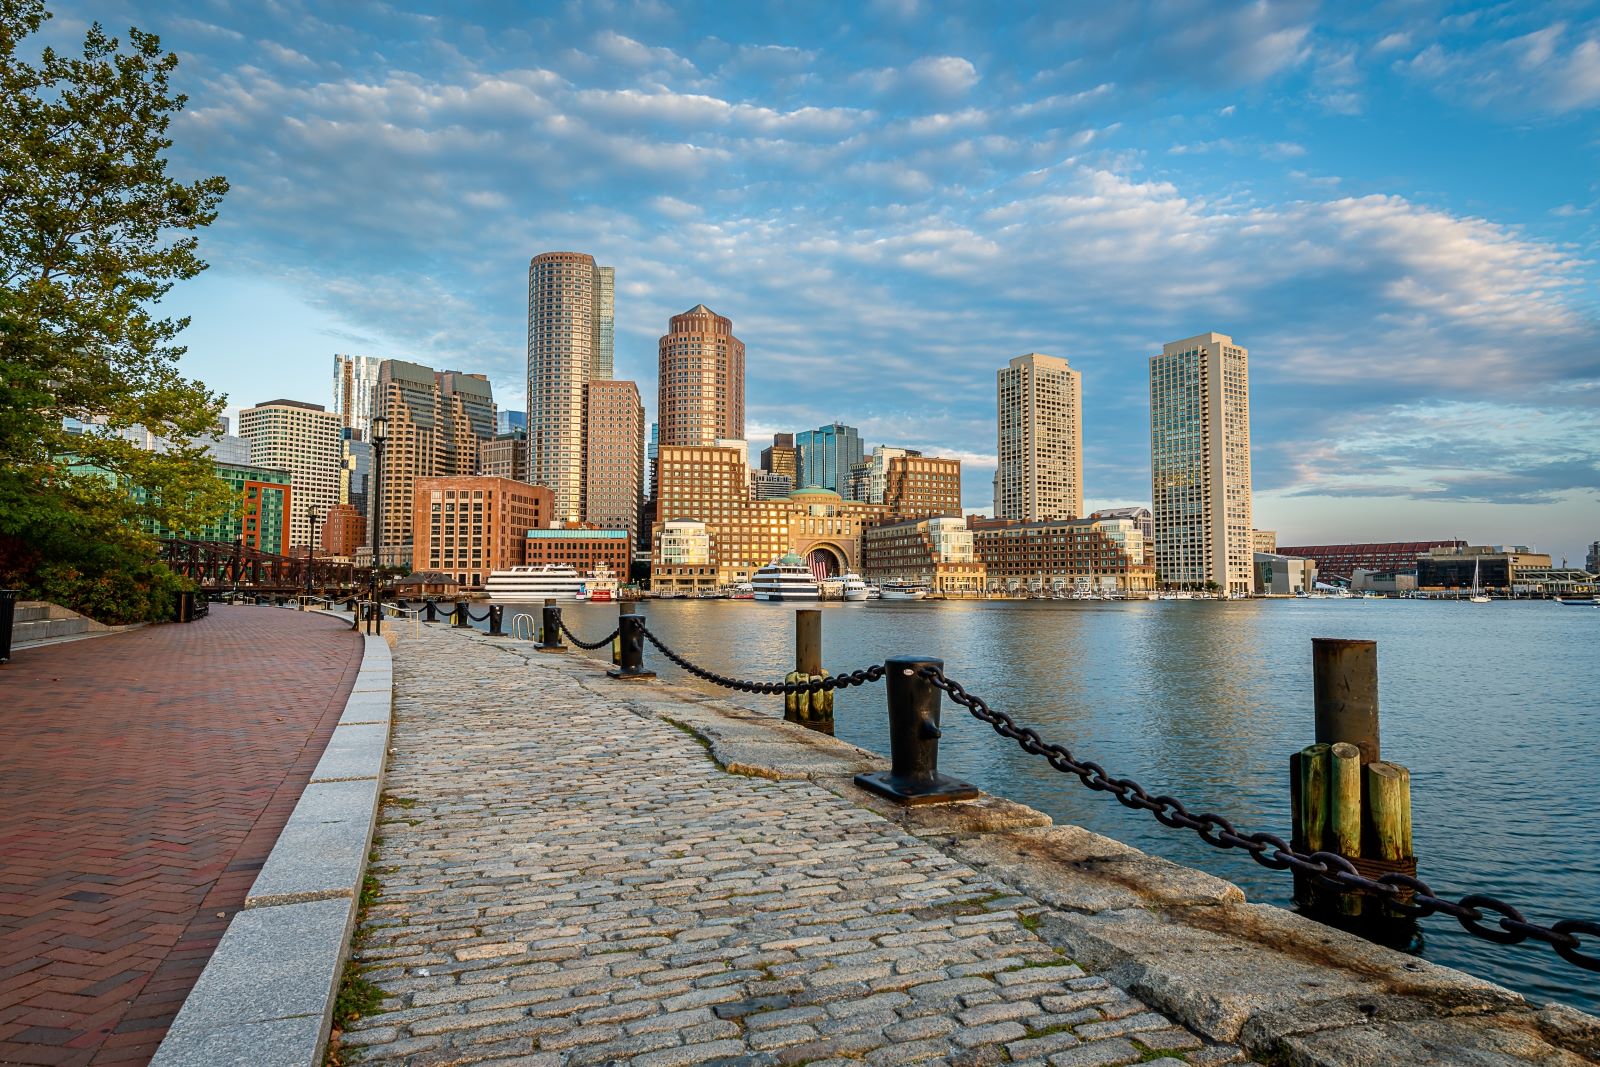 <p class="wp-caption-text">Image credit: Shutterstock / Chris LaBasco</p>  <p>This park includes significant sites like Bunker Hill Monument, the Old North Church, and the USS Constitution, each crucial to understanding Boston’s role in the Revolution.</p>